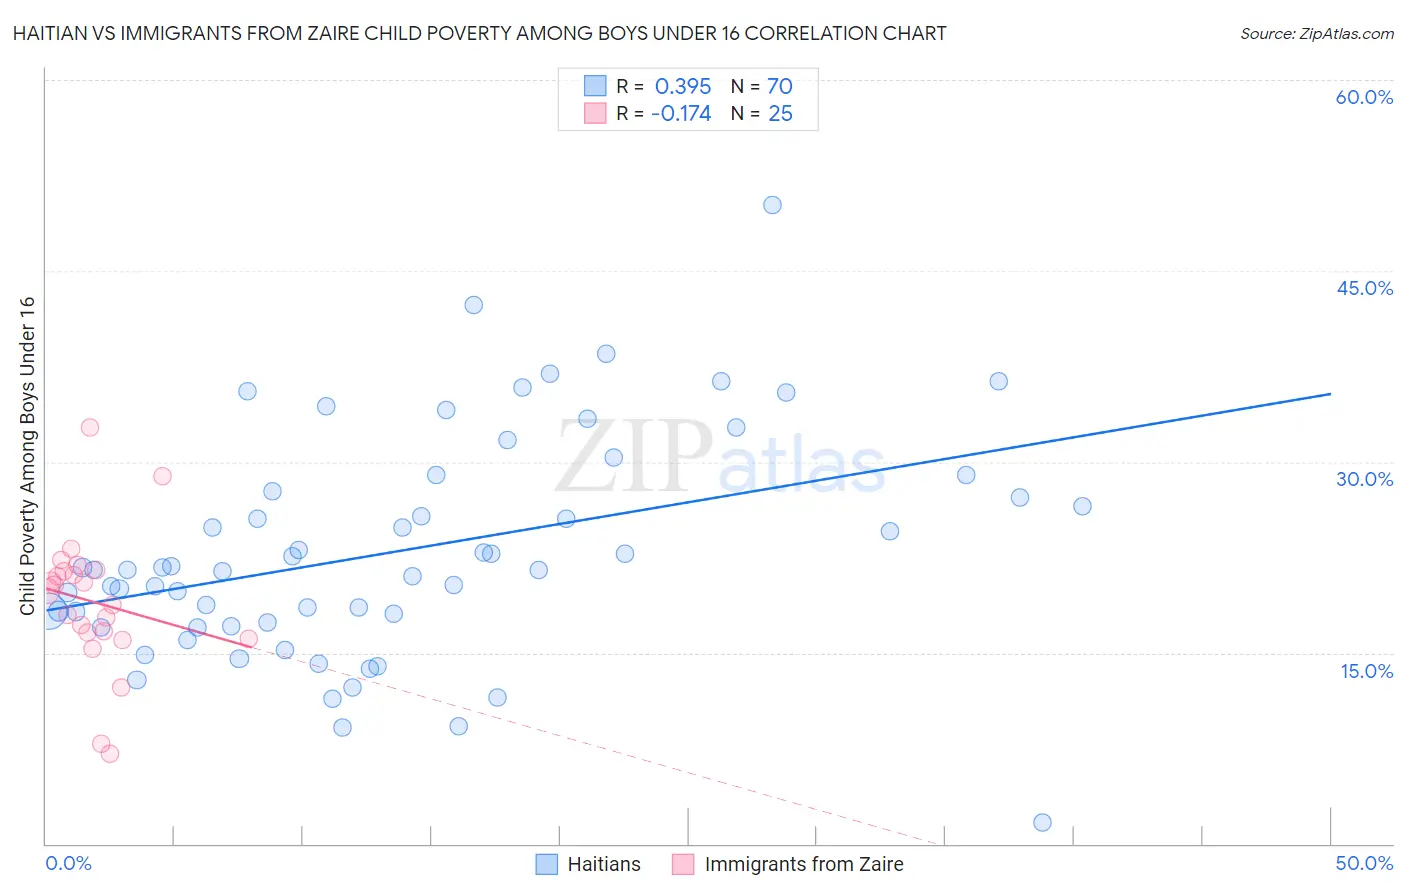 Haitian vs Immigrants from Zaire Child Poverty Among Boys Under 16